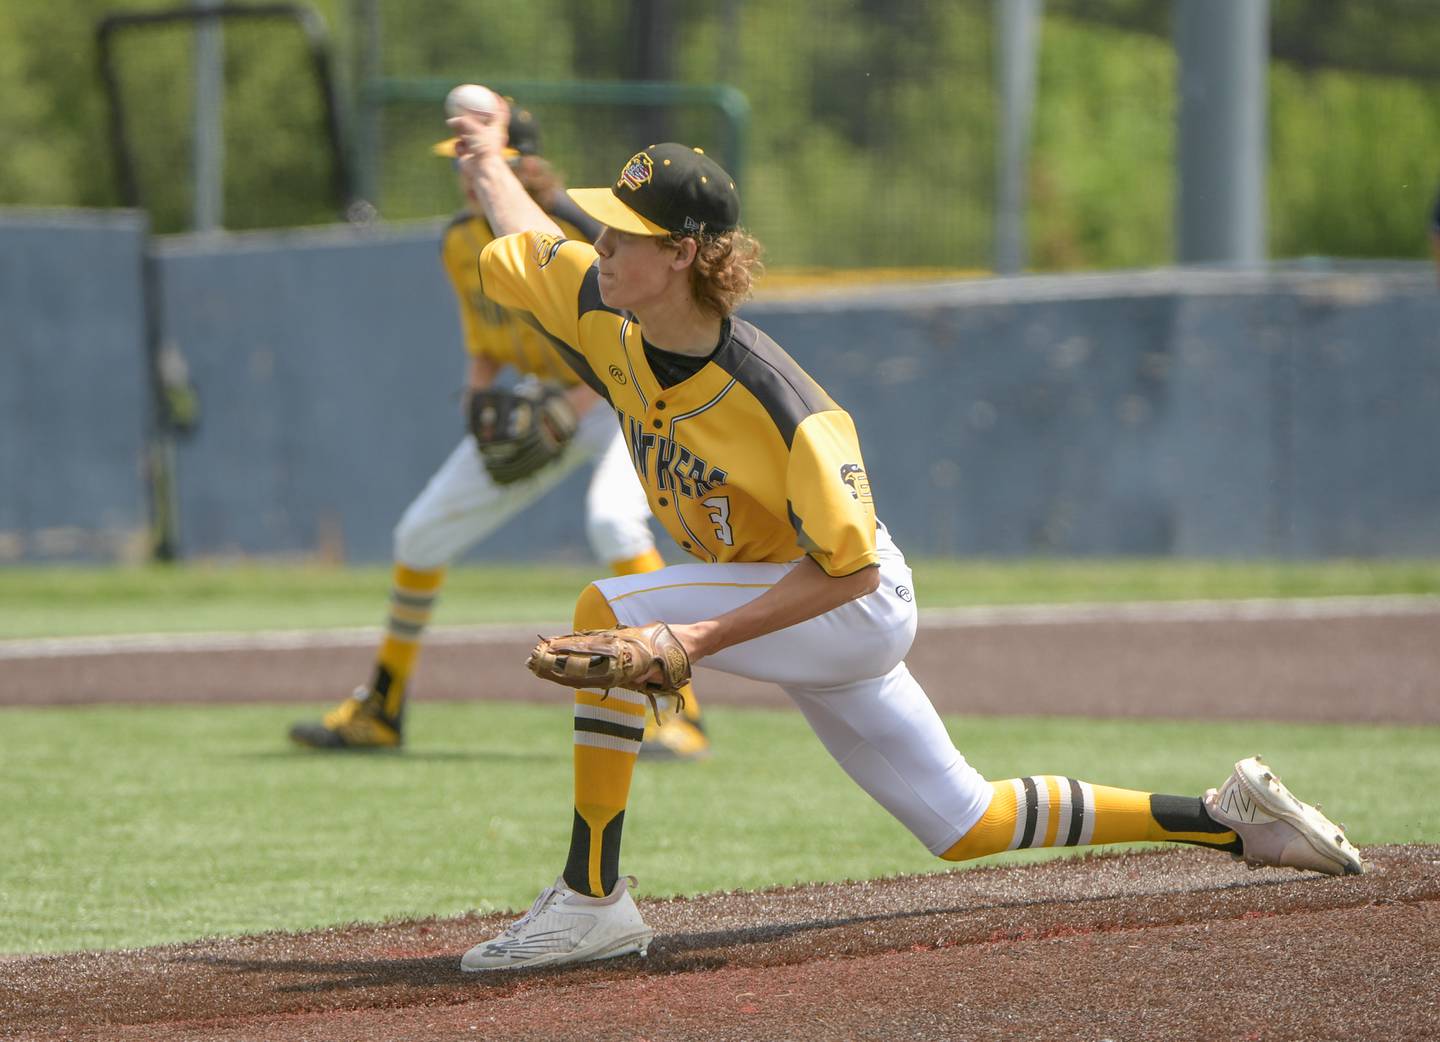 Putnam County's Drake Smith (3) pitches against Marquette during the Class 1A Harvest Christian Baseball at Judson College in Elgin on Saturday, May 28, 2022.